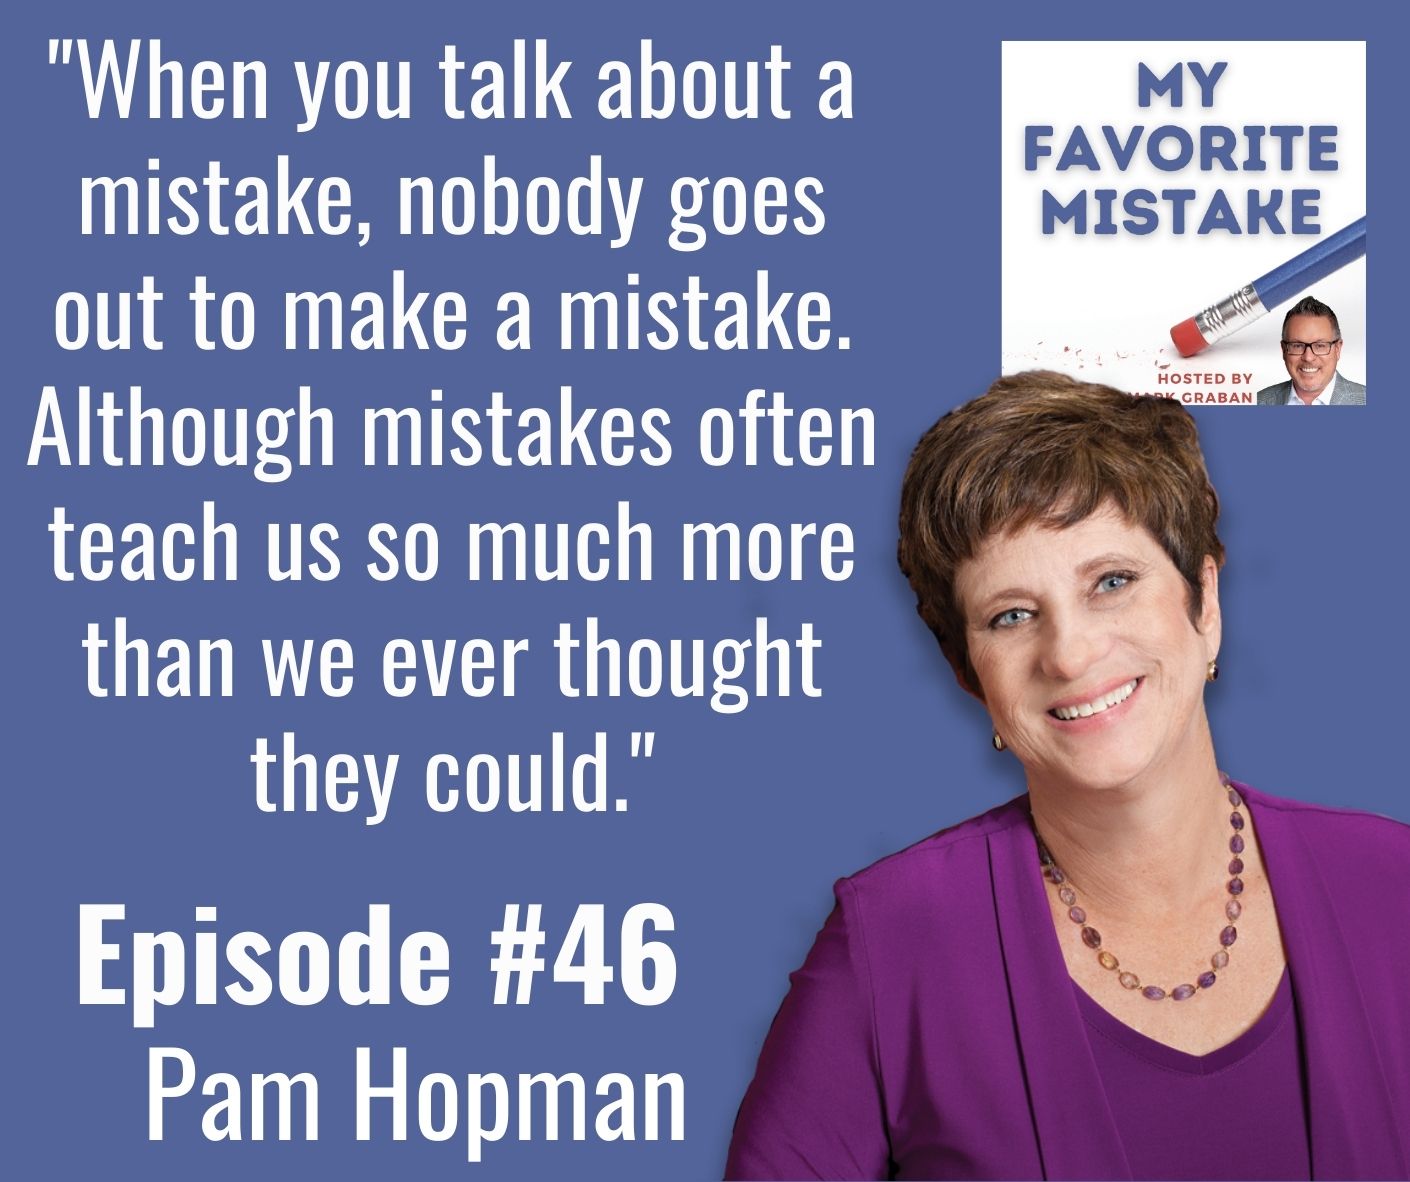 "When you talk about a mistake, nobody goes out to make a mistake. Although mistakes often teach us so much more than we ever thought they could."